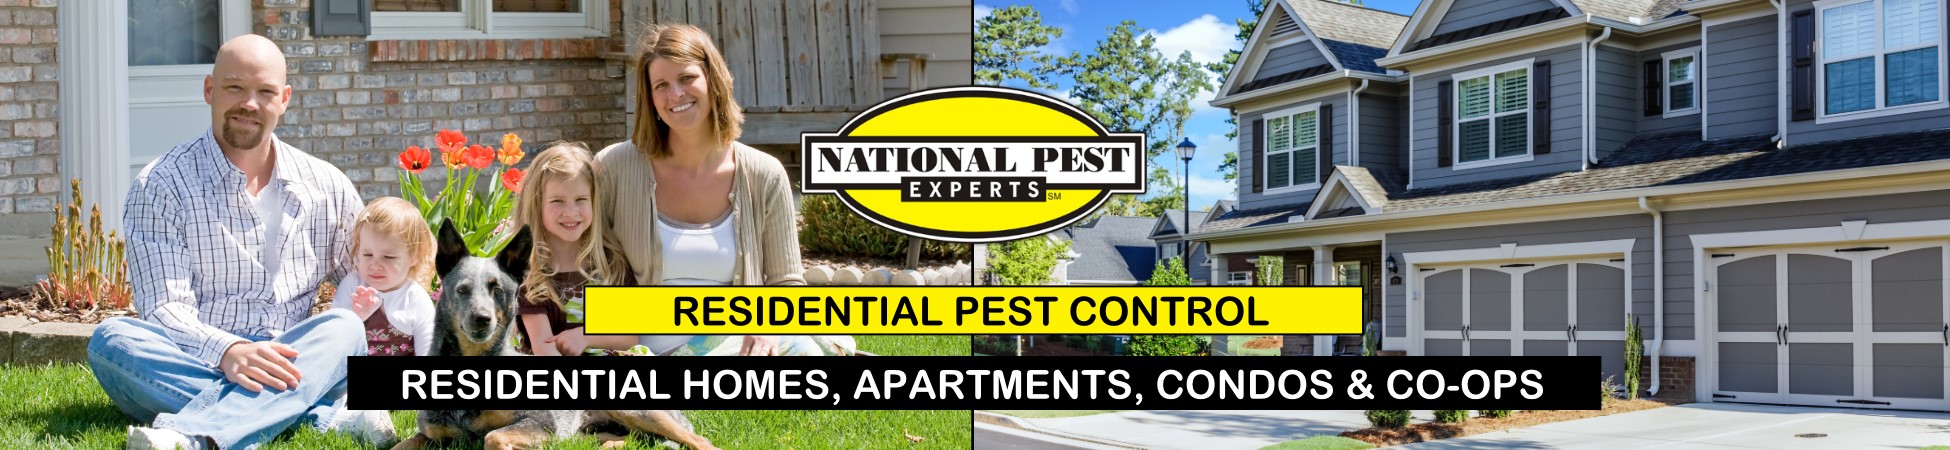 National Pest Experts - Residential exterminating and pest control in Old Bethpage, NY